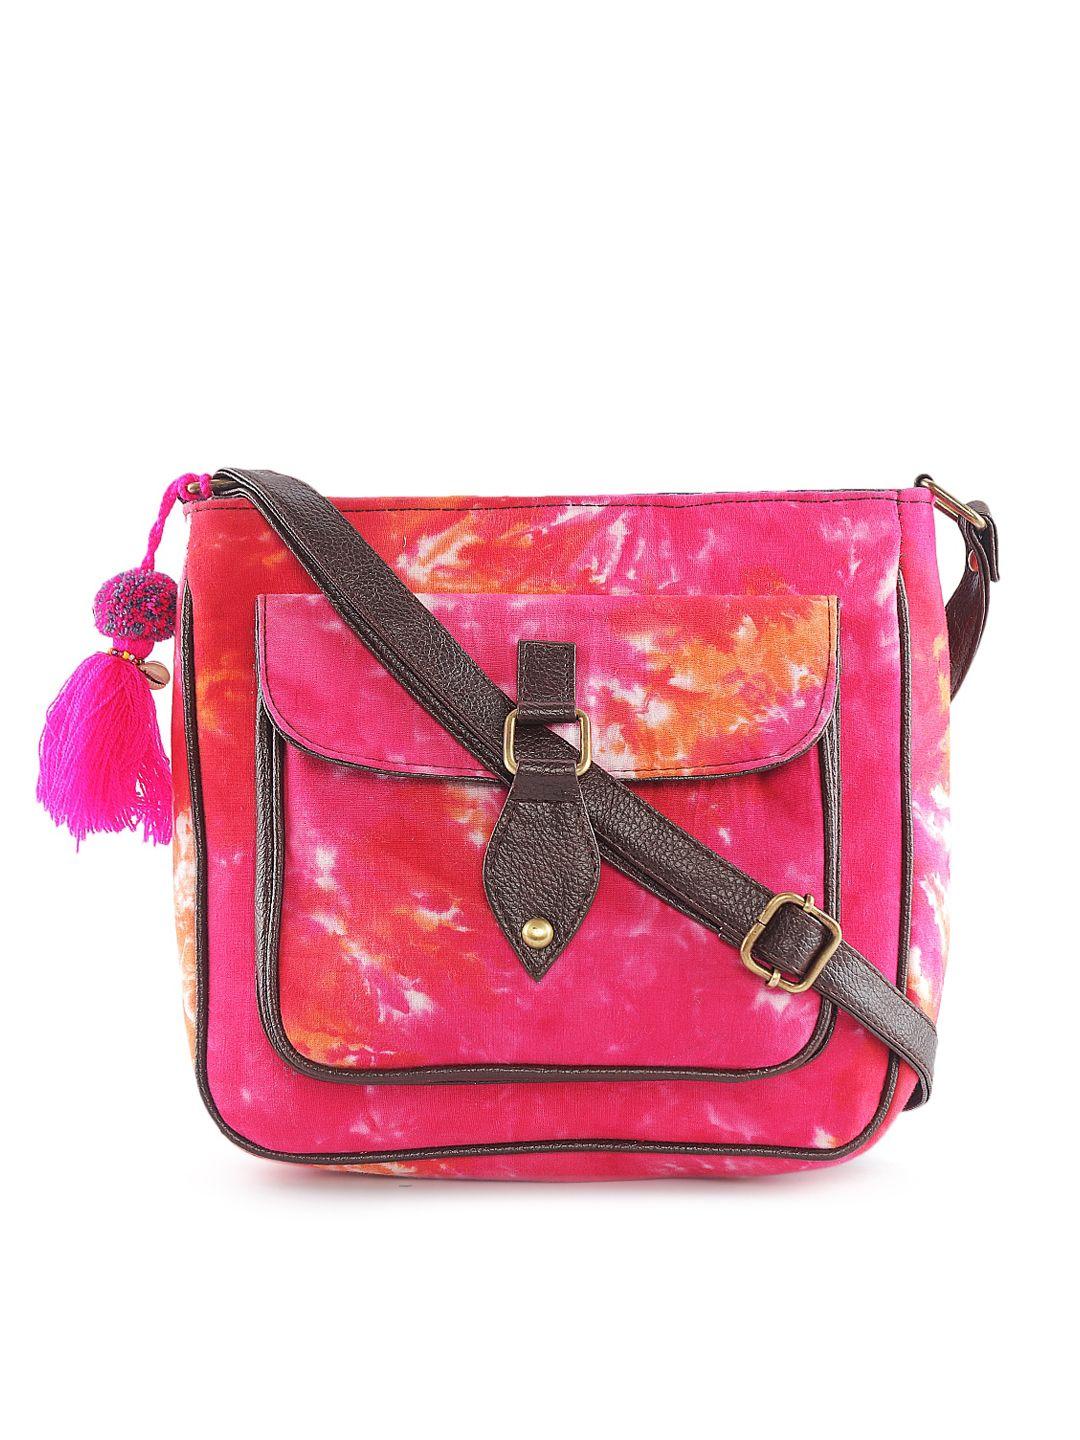 nepri printed structured sling bag with tasselled